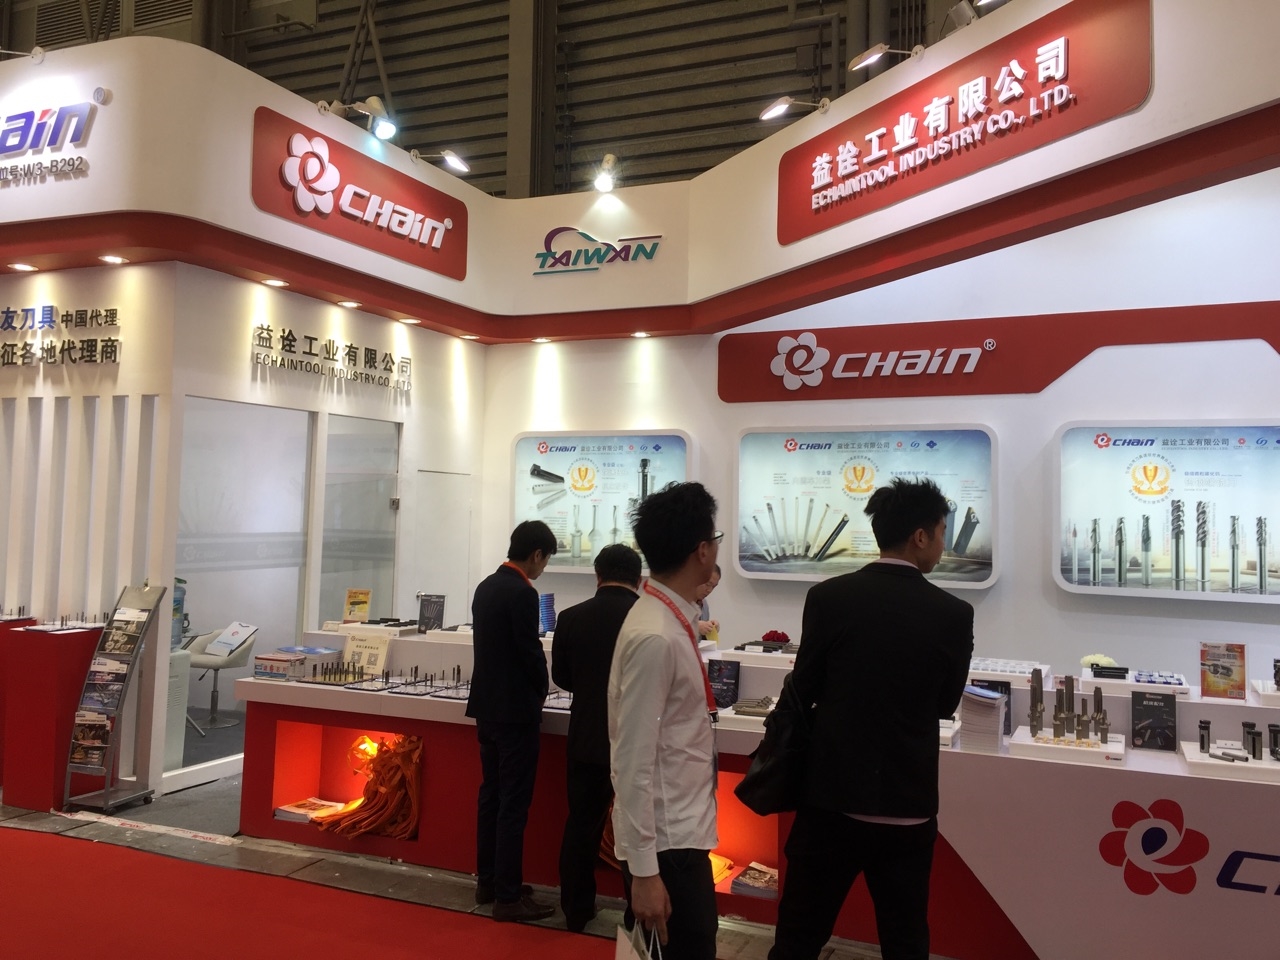 Echaintool promote Indexable cutting tools at CCMT2020 Exhibition.